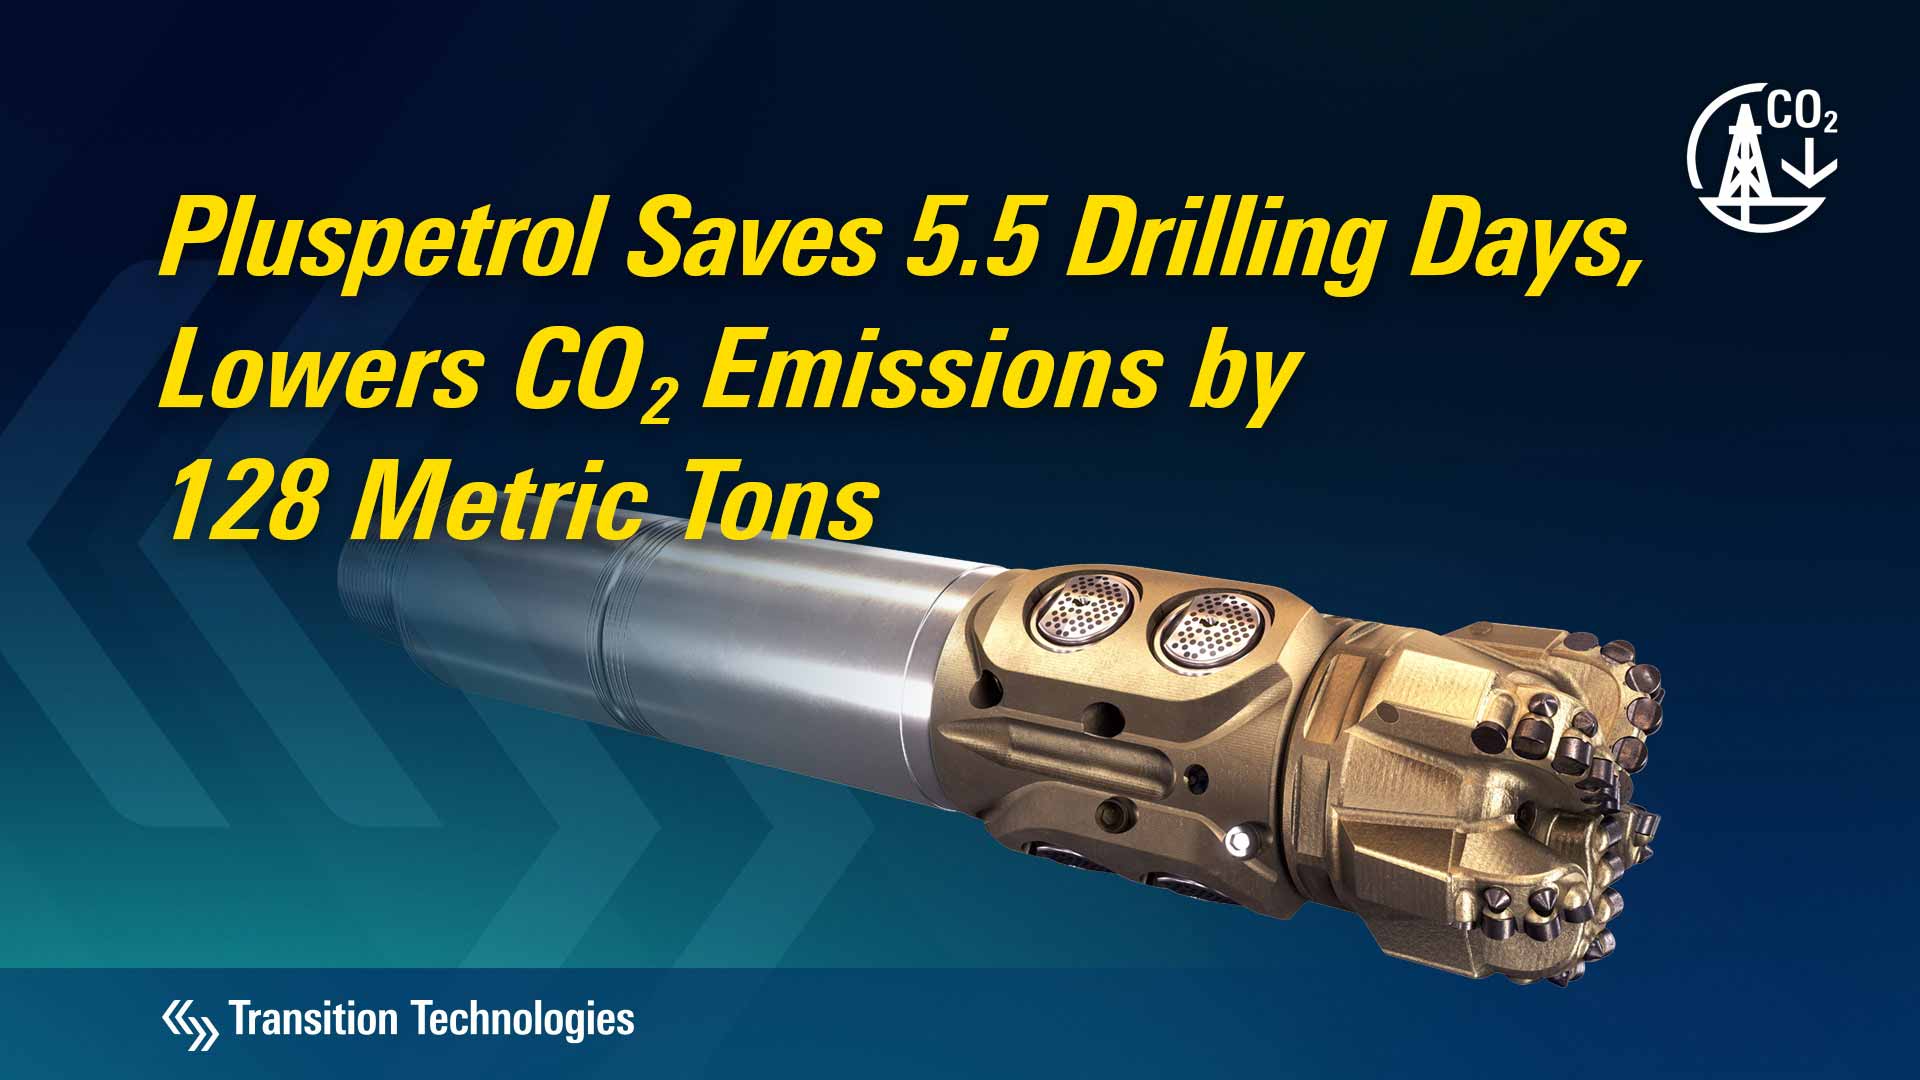 Pluspetrol improved operational efficiency with less drill time, saving 5.5 rig days and lowering CO2 emissions by 128 metric tons.